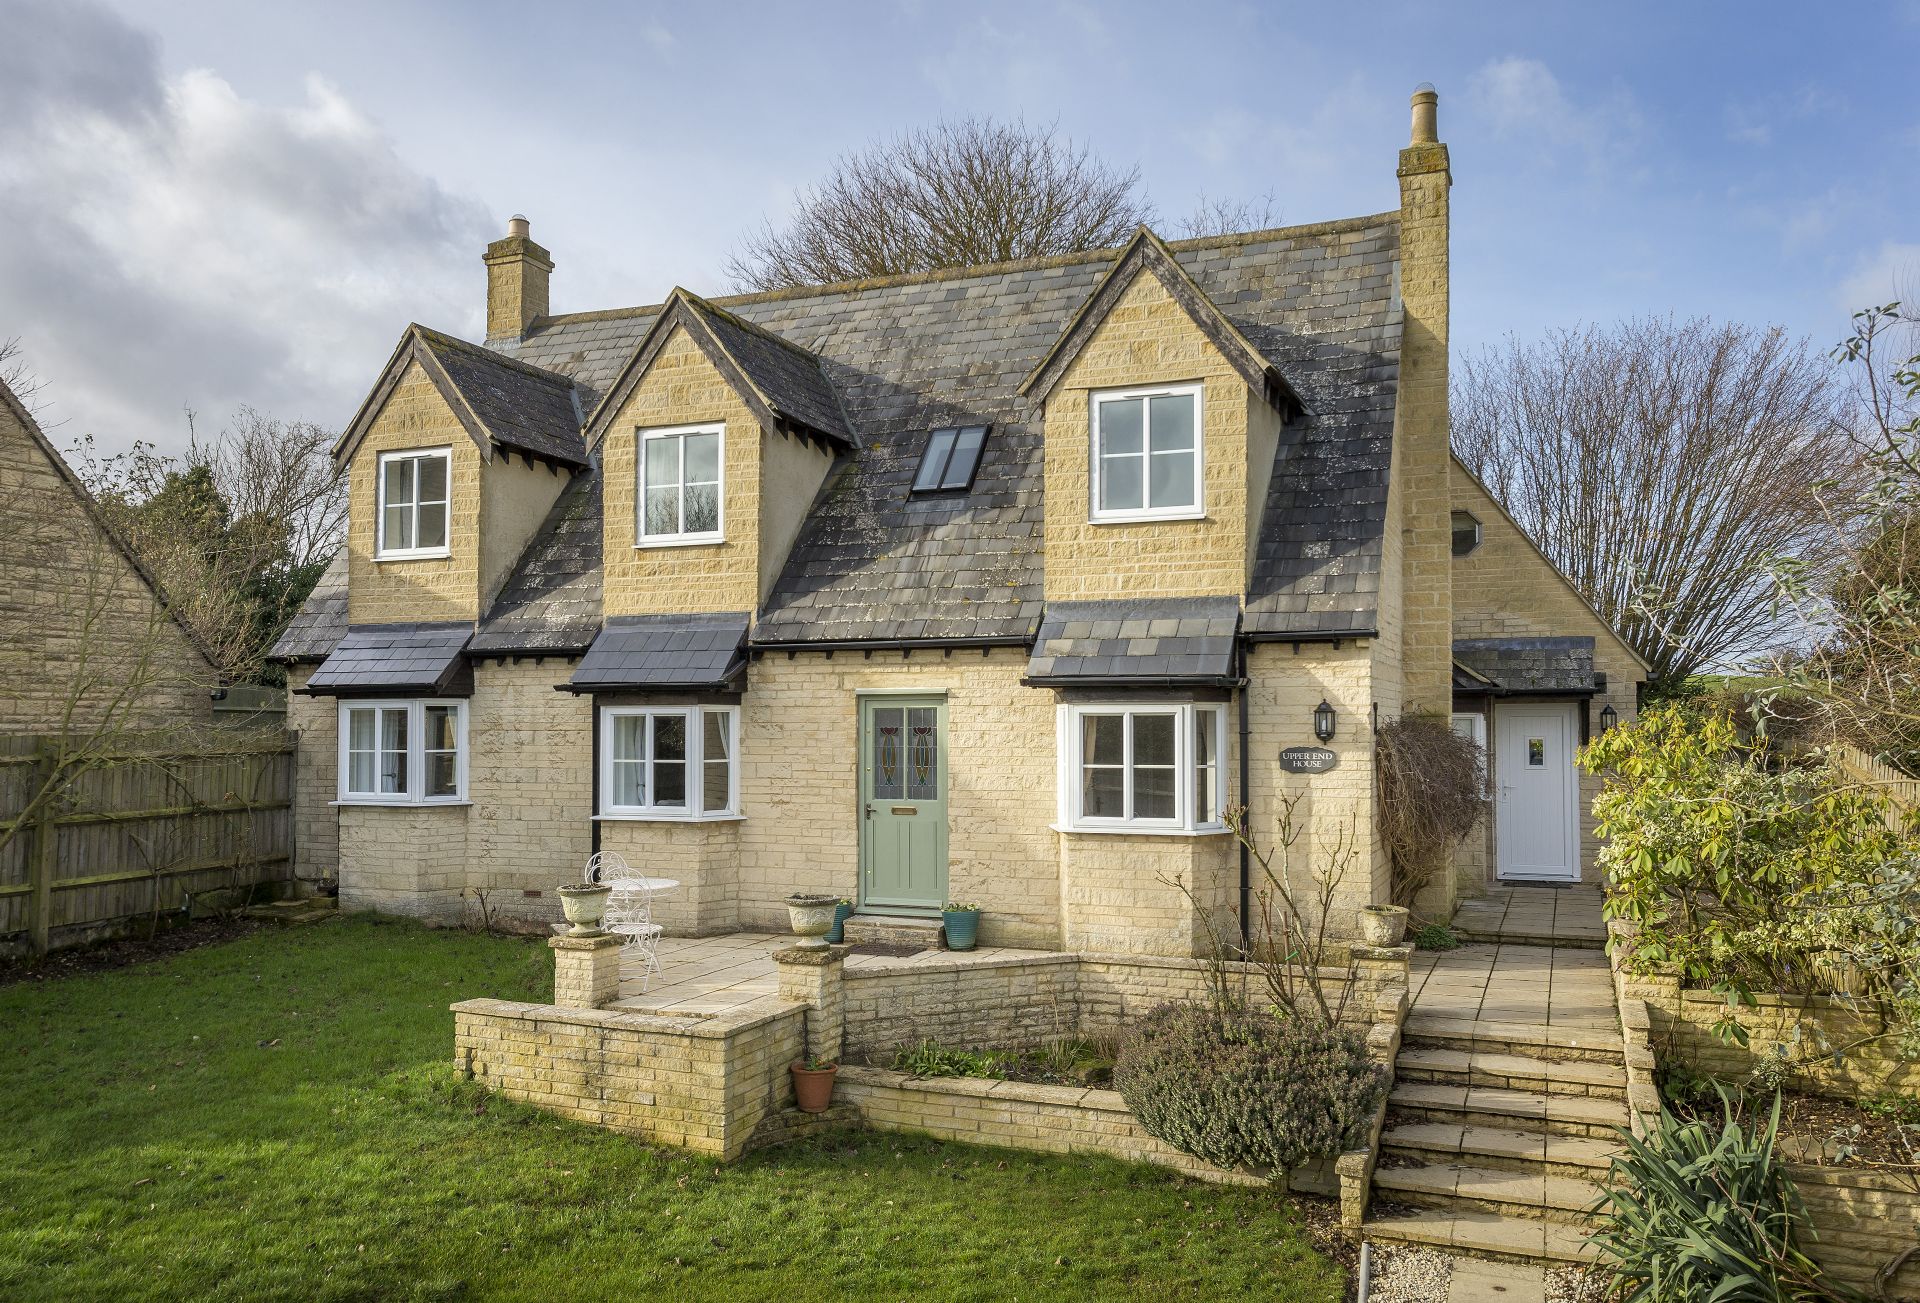 Upper End House is located in Shipton-under-Wychwood